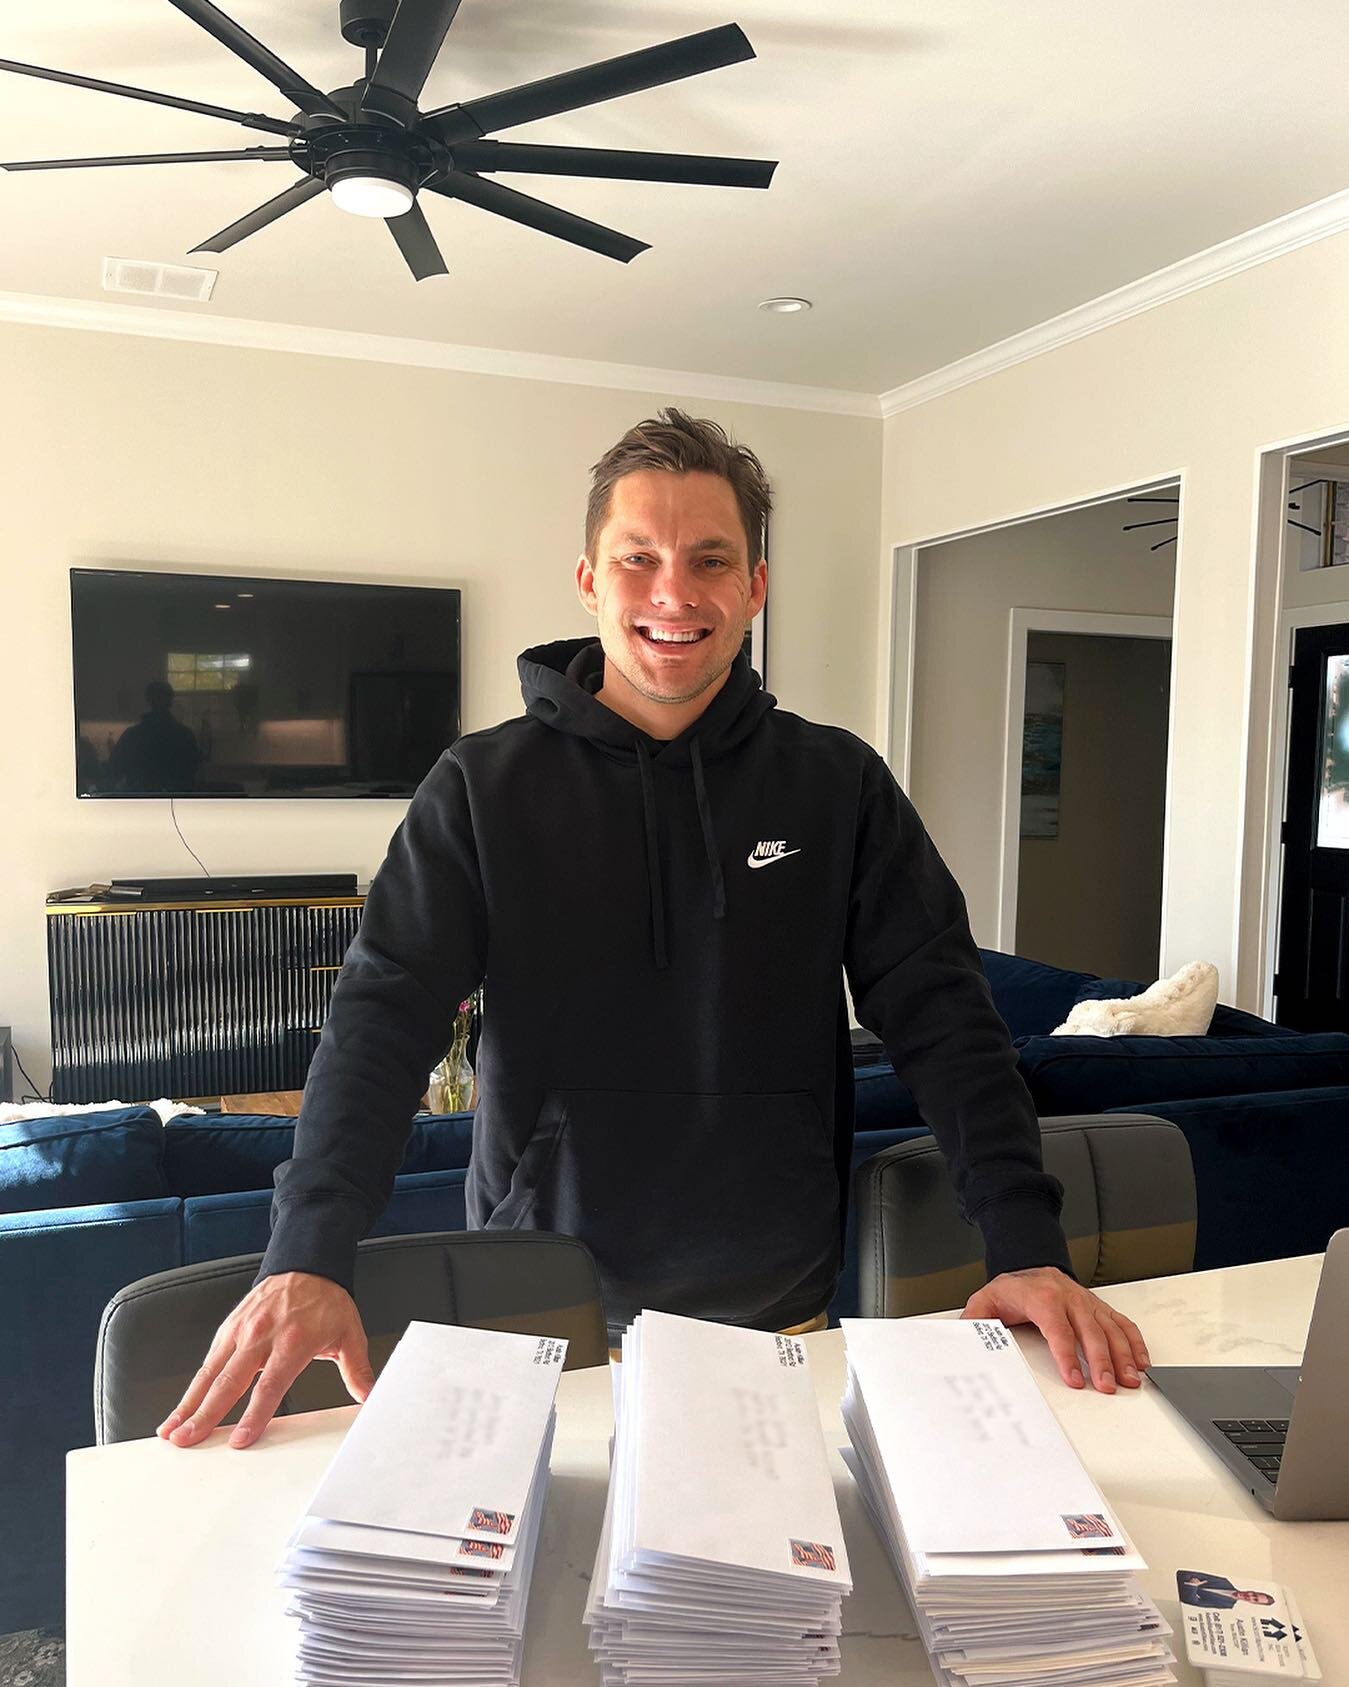 Wrapping up another batch of letters before the end of the year! Most people don't understand the work that Investors and Agents put into procuring deals. Although some are easy, 90% of them take a significant amount of time and energy with no guaran